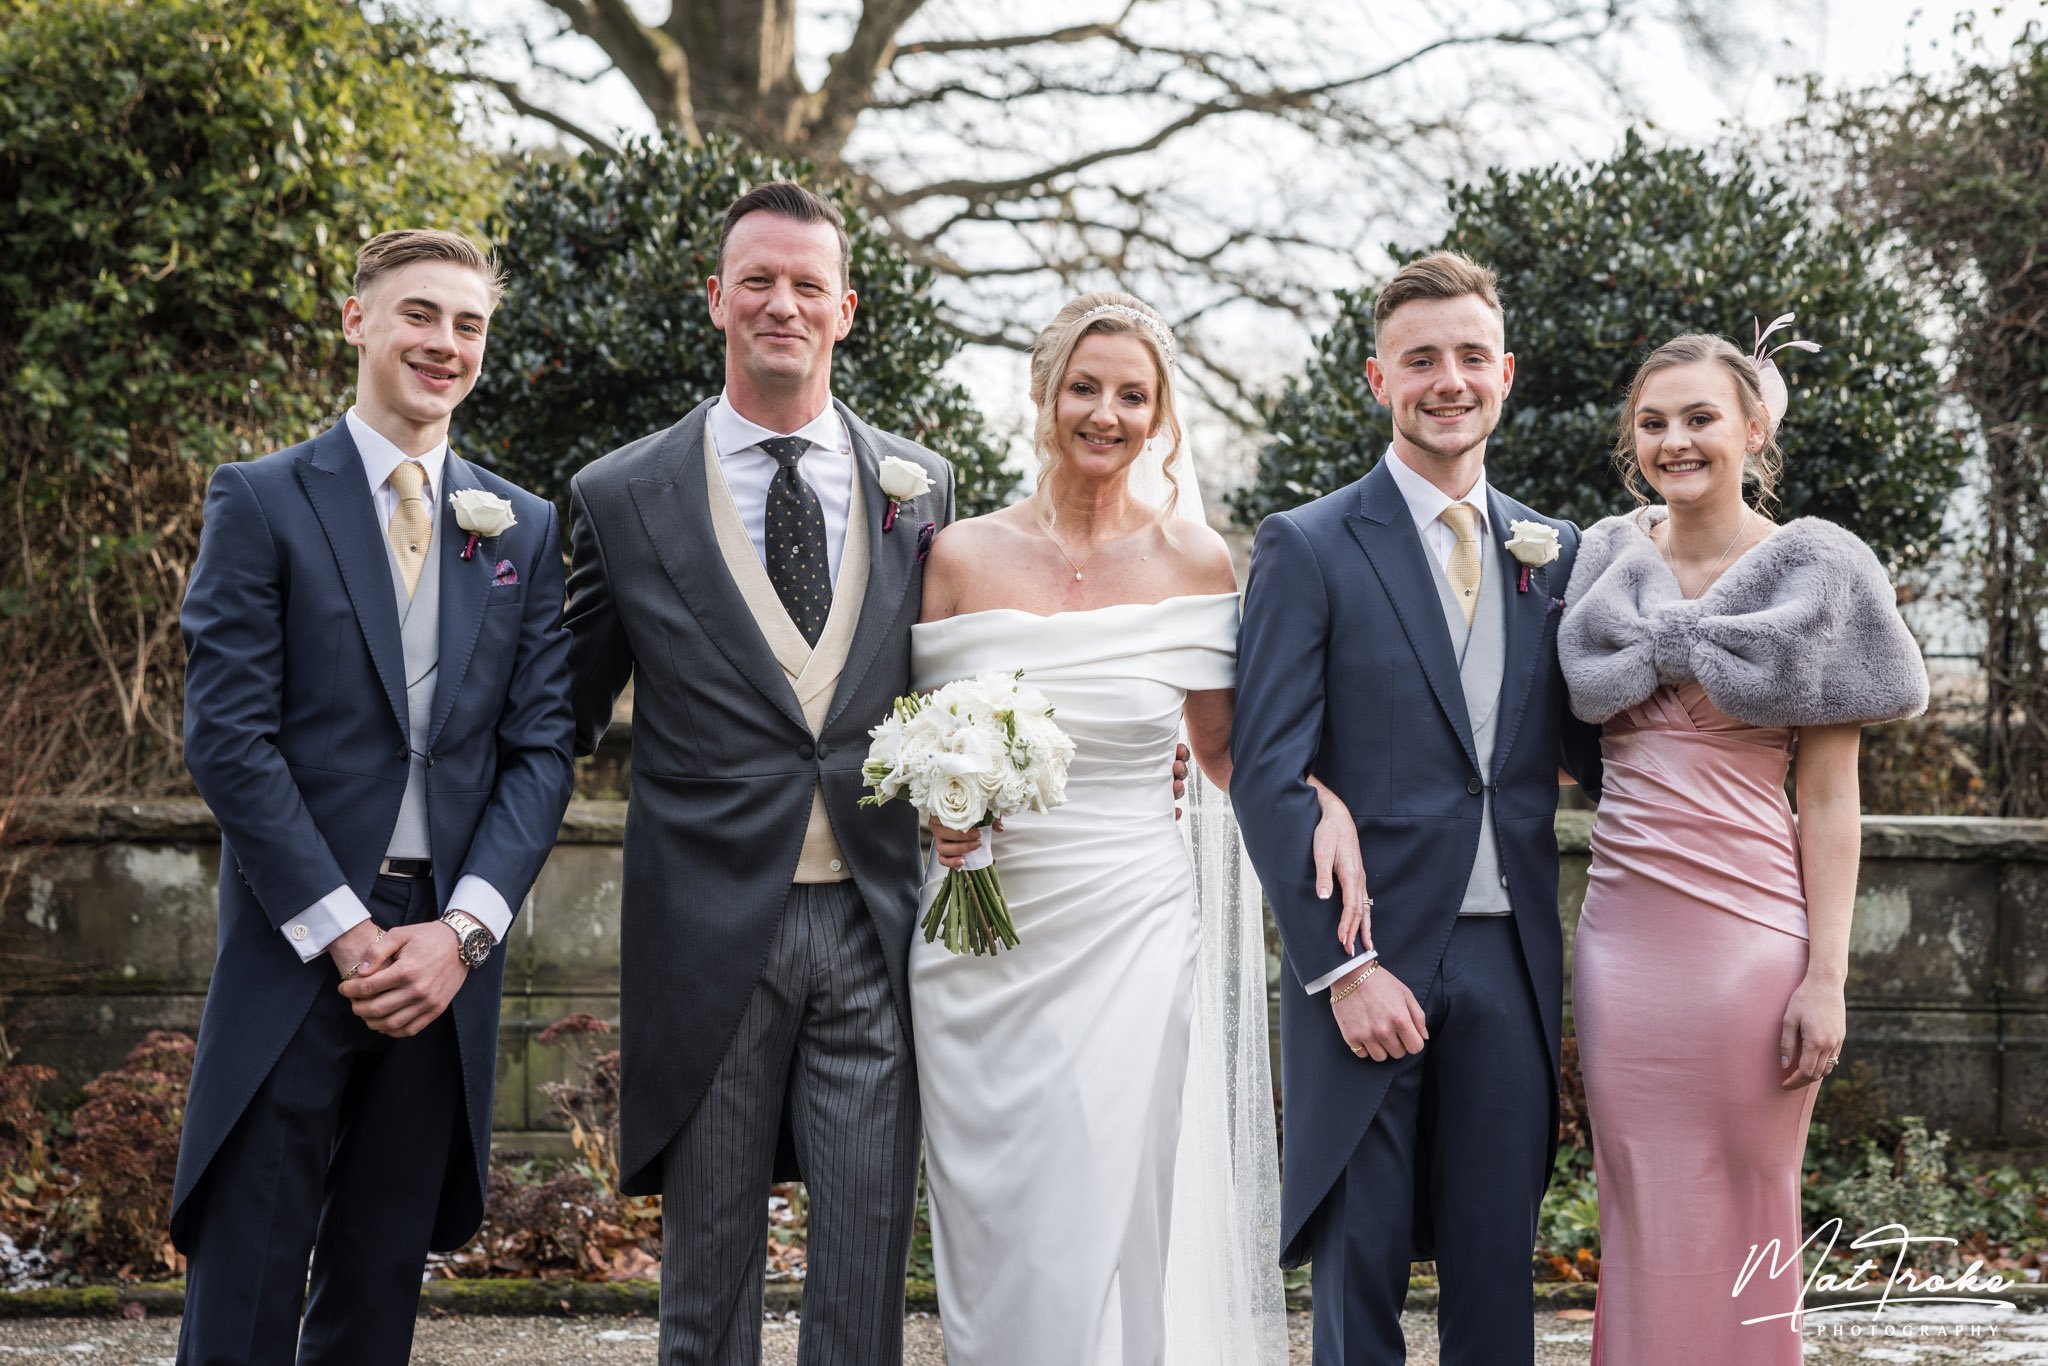 chesterfield.wedding.photographer.derby.relaxed-44.jpg